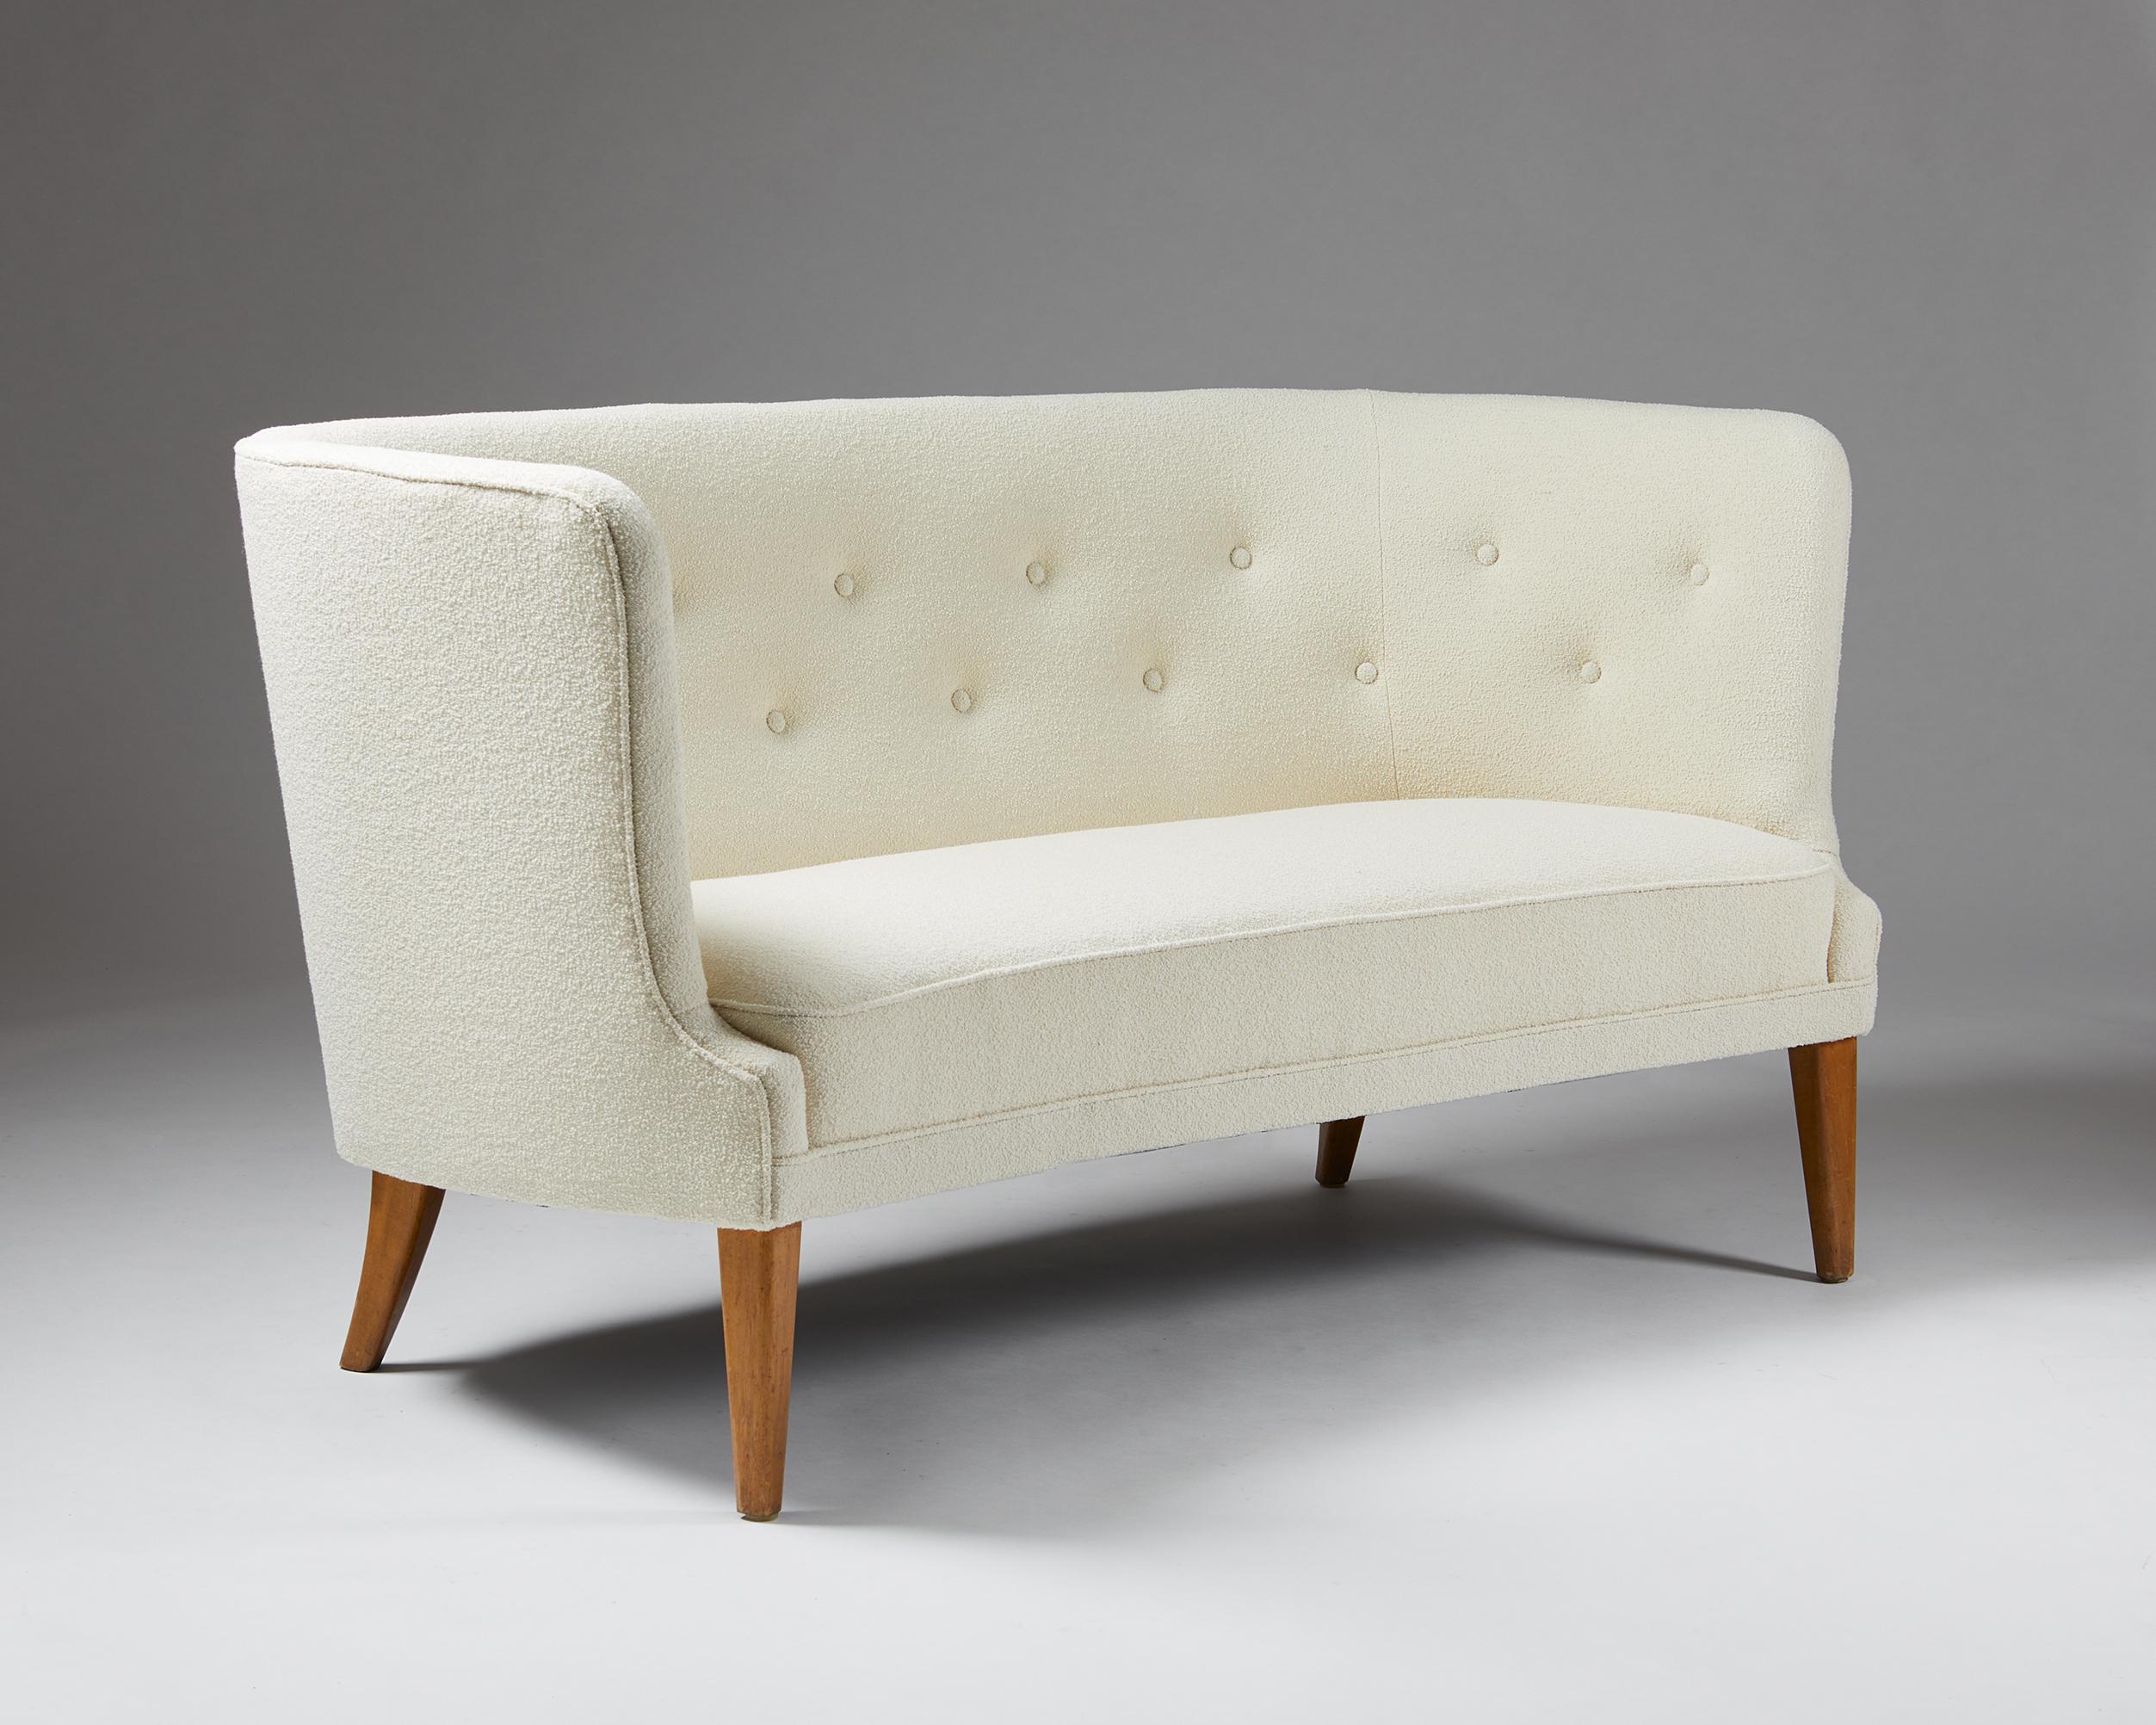 Sofa ‘Royal’ designed by Werner West for Oy Stockmann AB,
Finland, 1950's.

Textile upholstery and lacquered wood legs.

The “Royal” sofa by Werner West is wonderfully comfortable and elegant with its high, enveloping backrest and integrated arms.